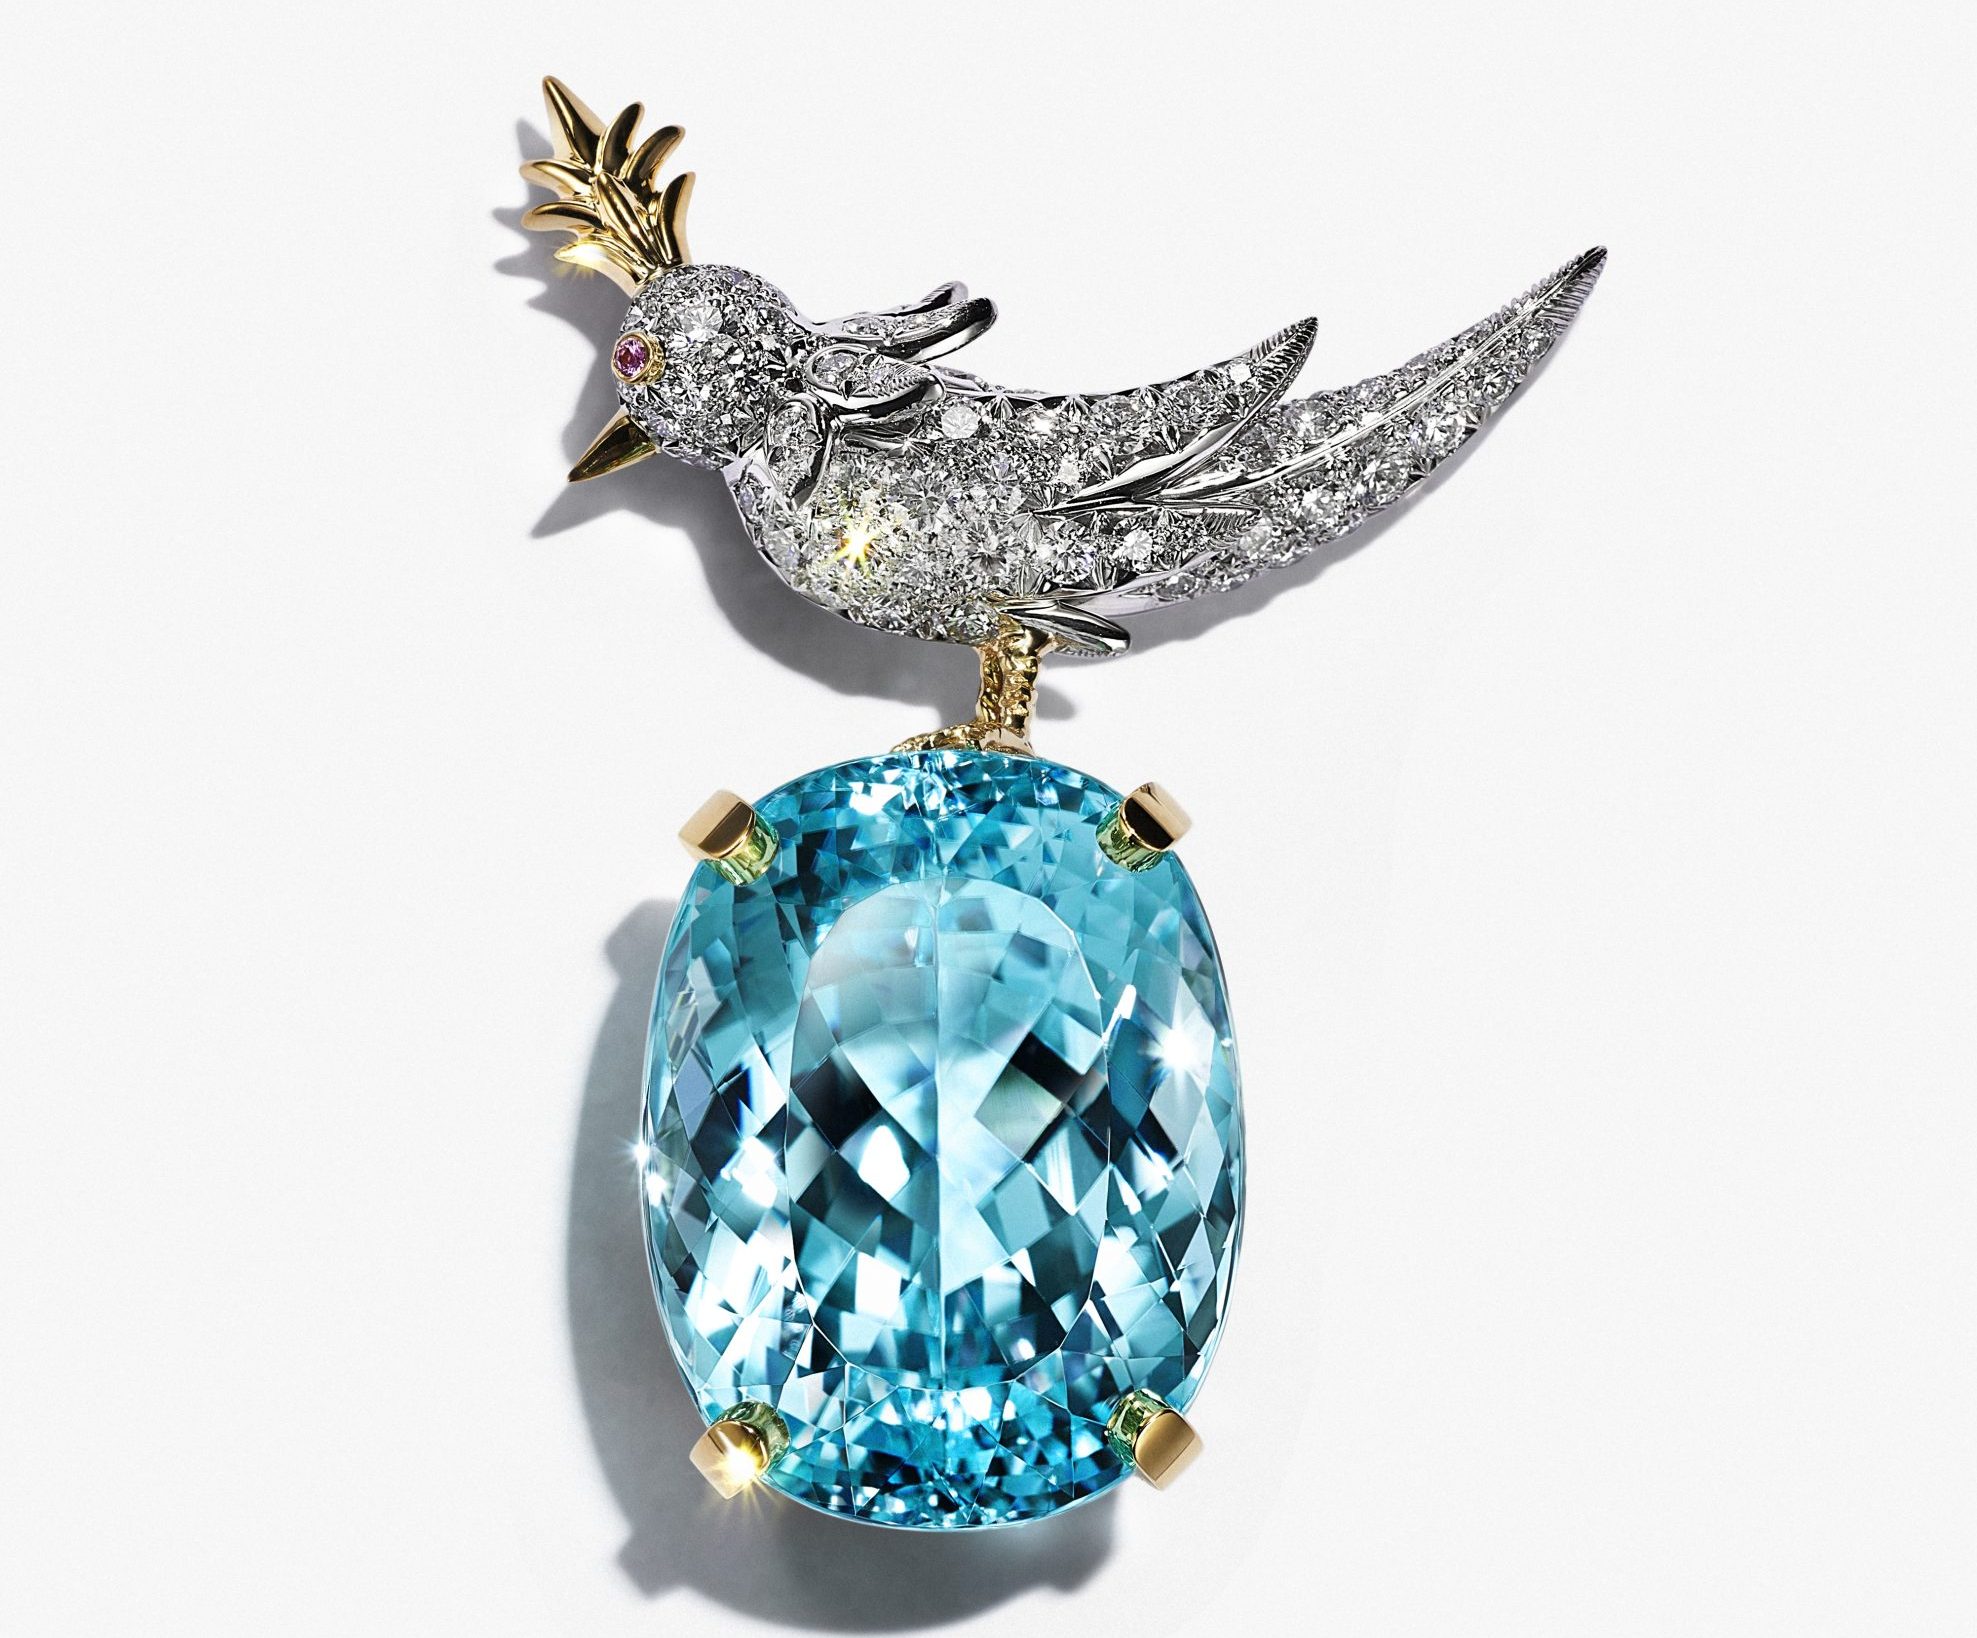 A Dazzling London Exhibition Traces Tiffany & Co.'s History of